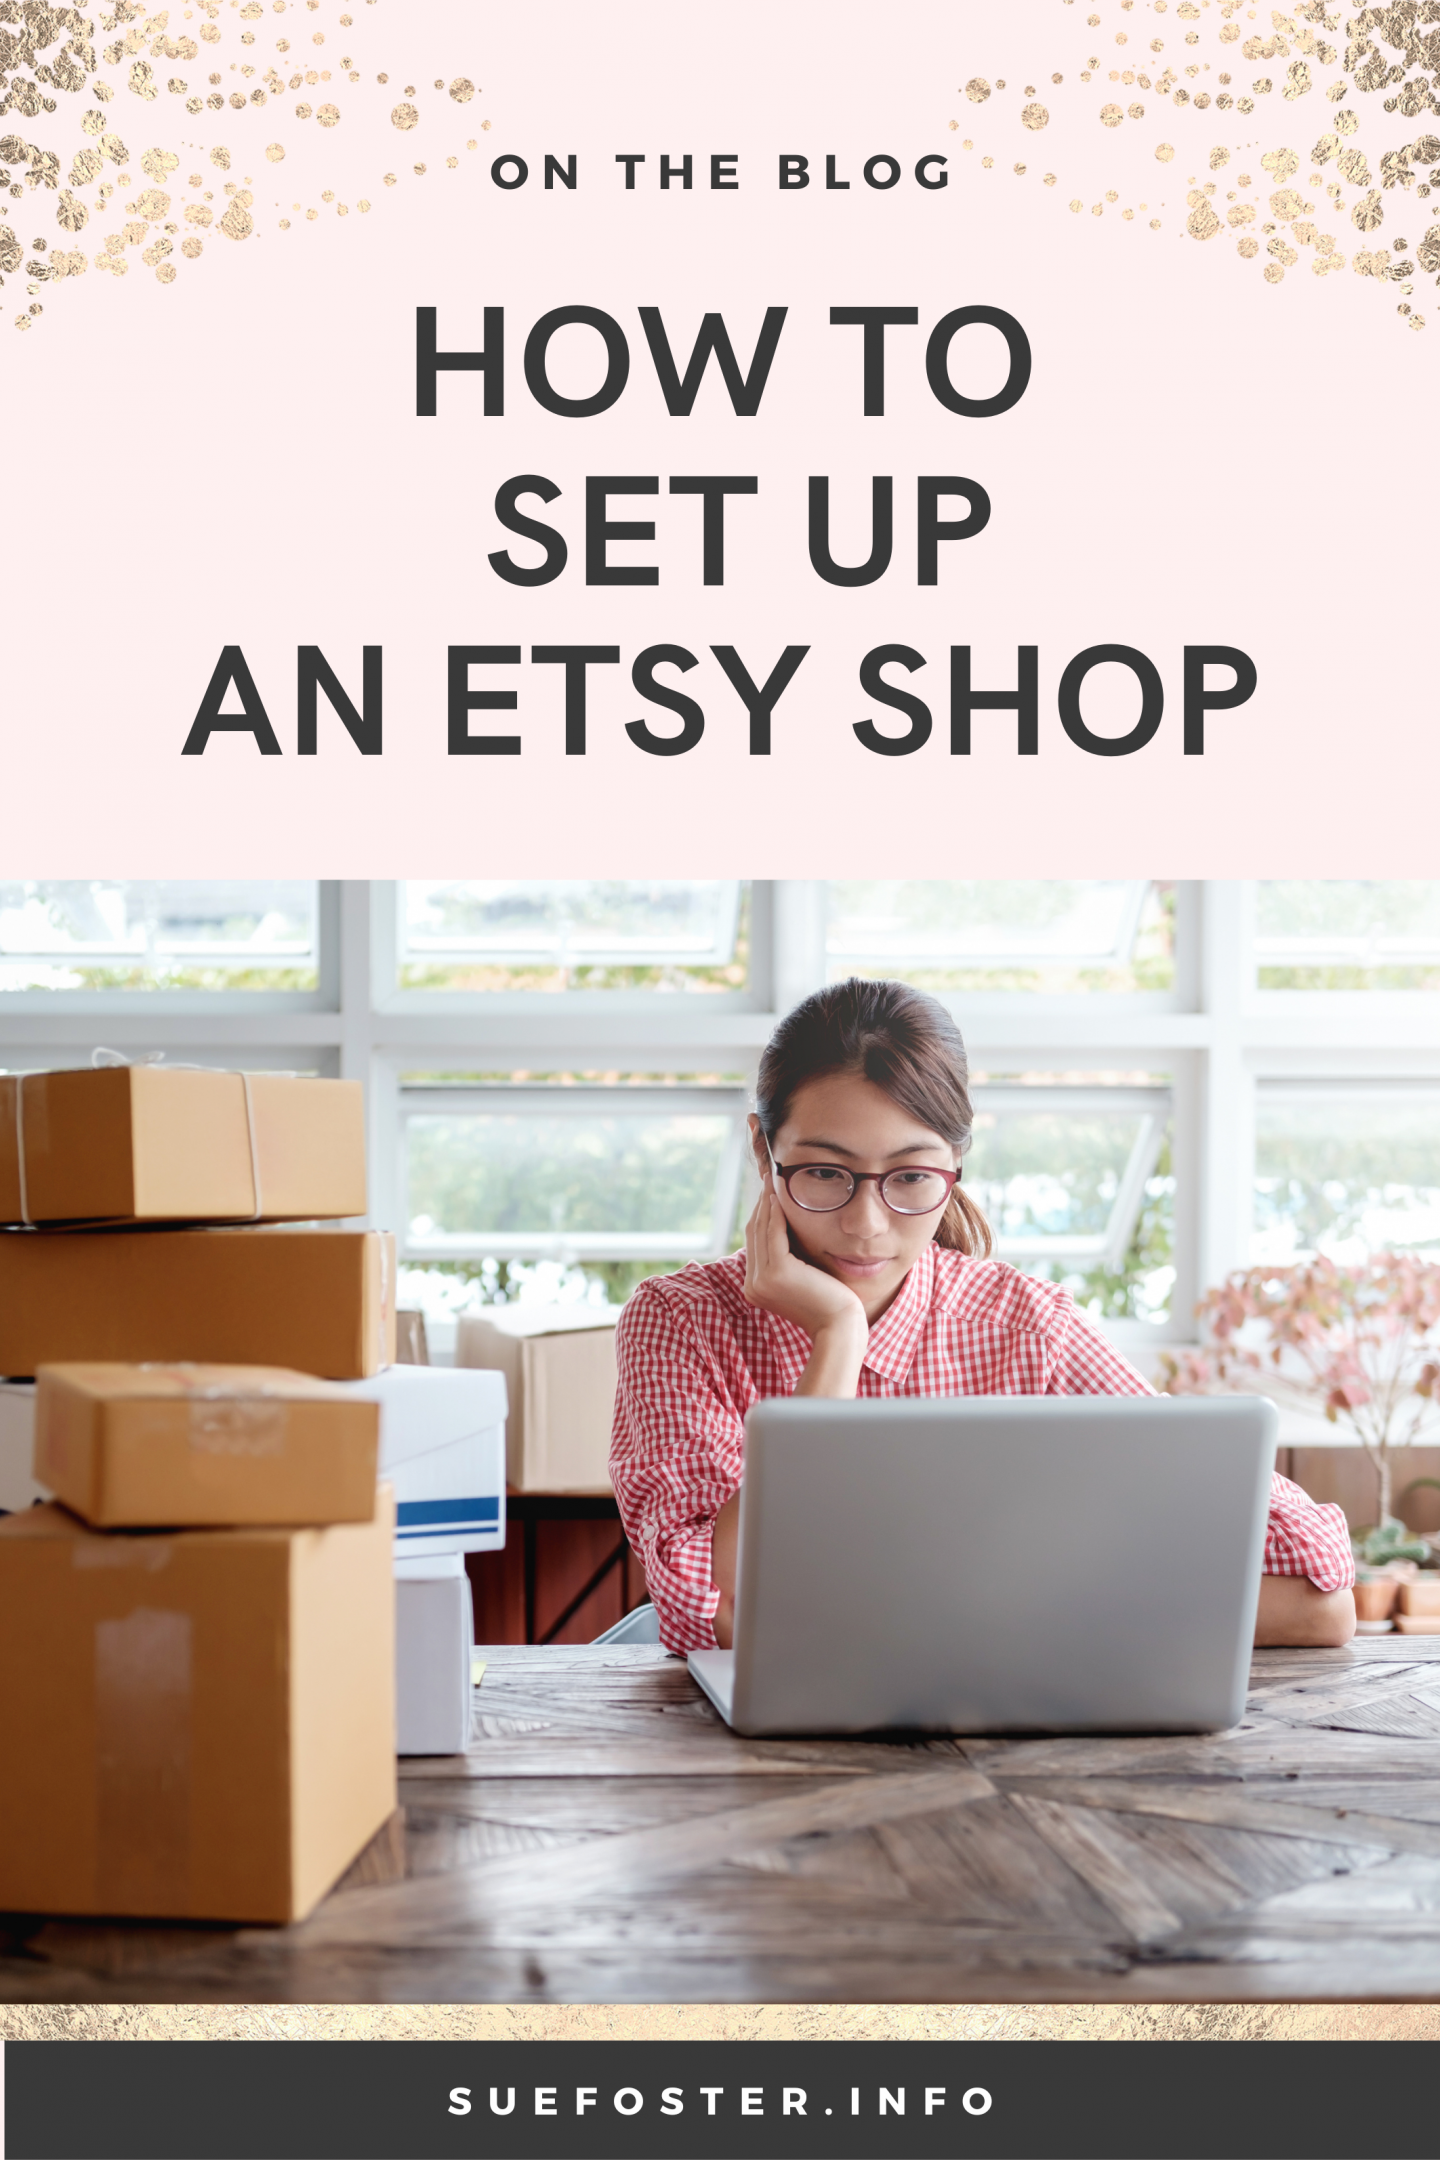 This post covers what to do before opening and how to set up an Etsy shop.